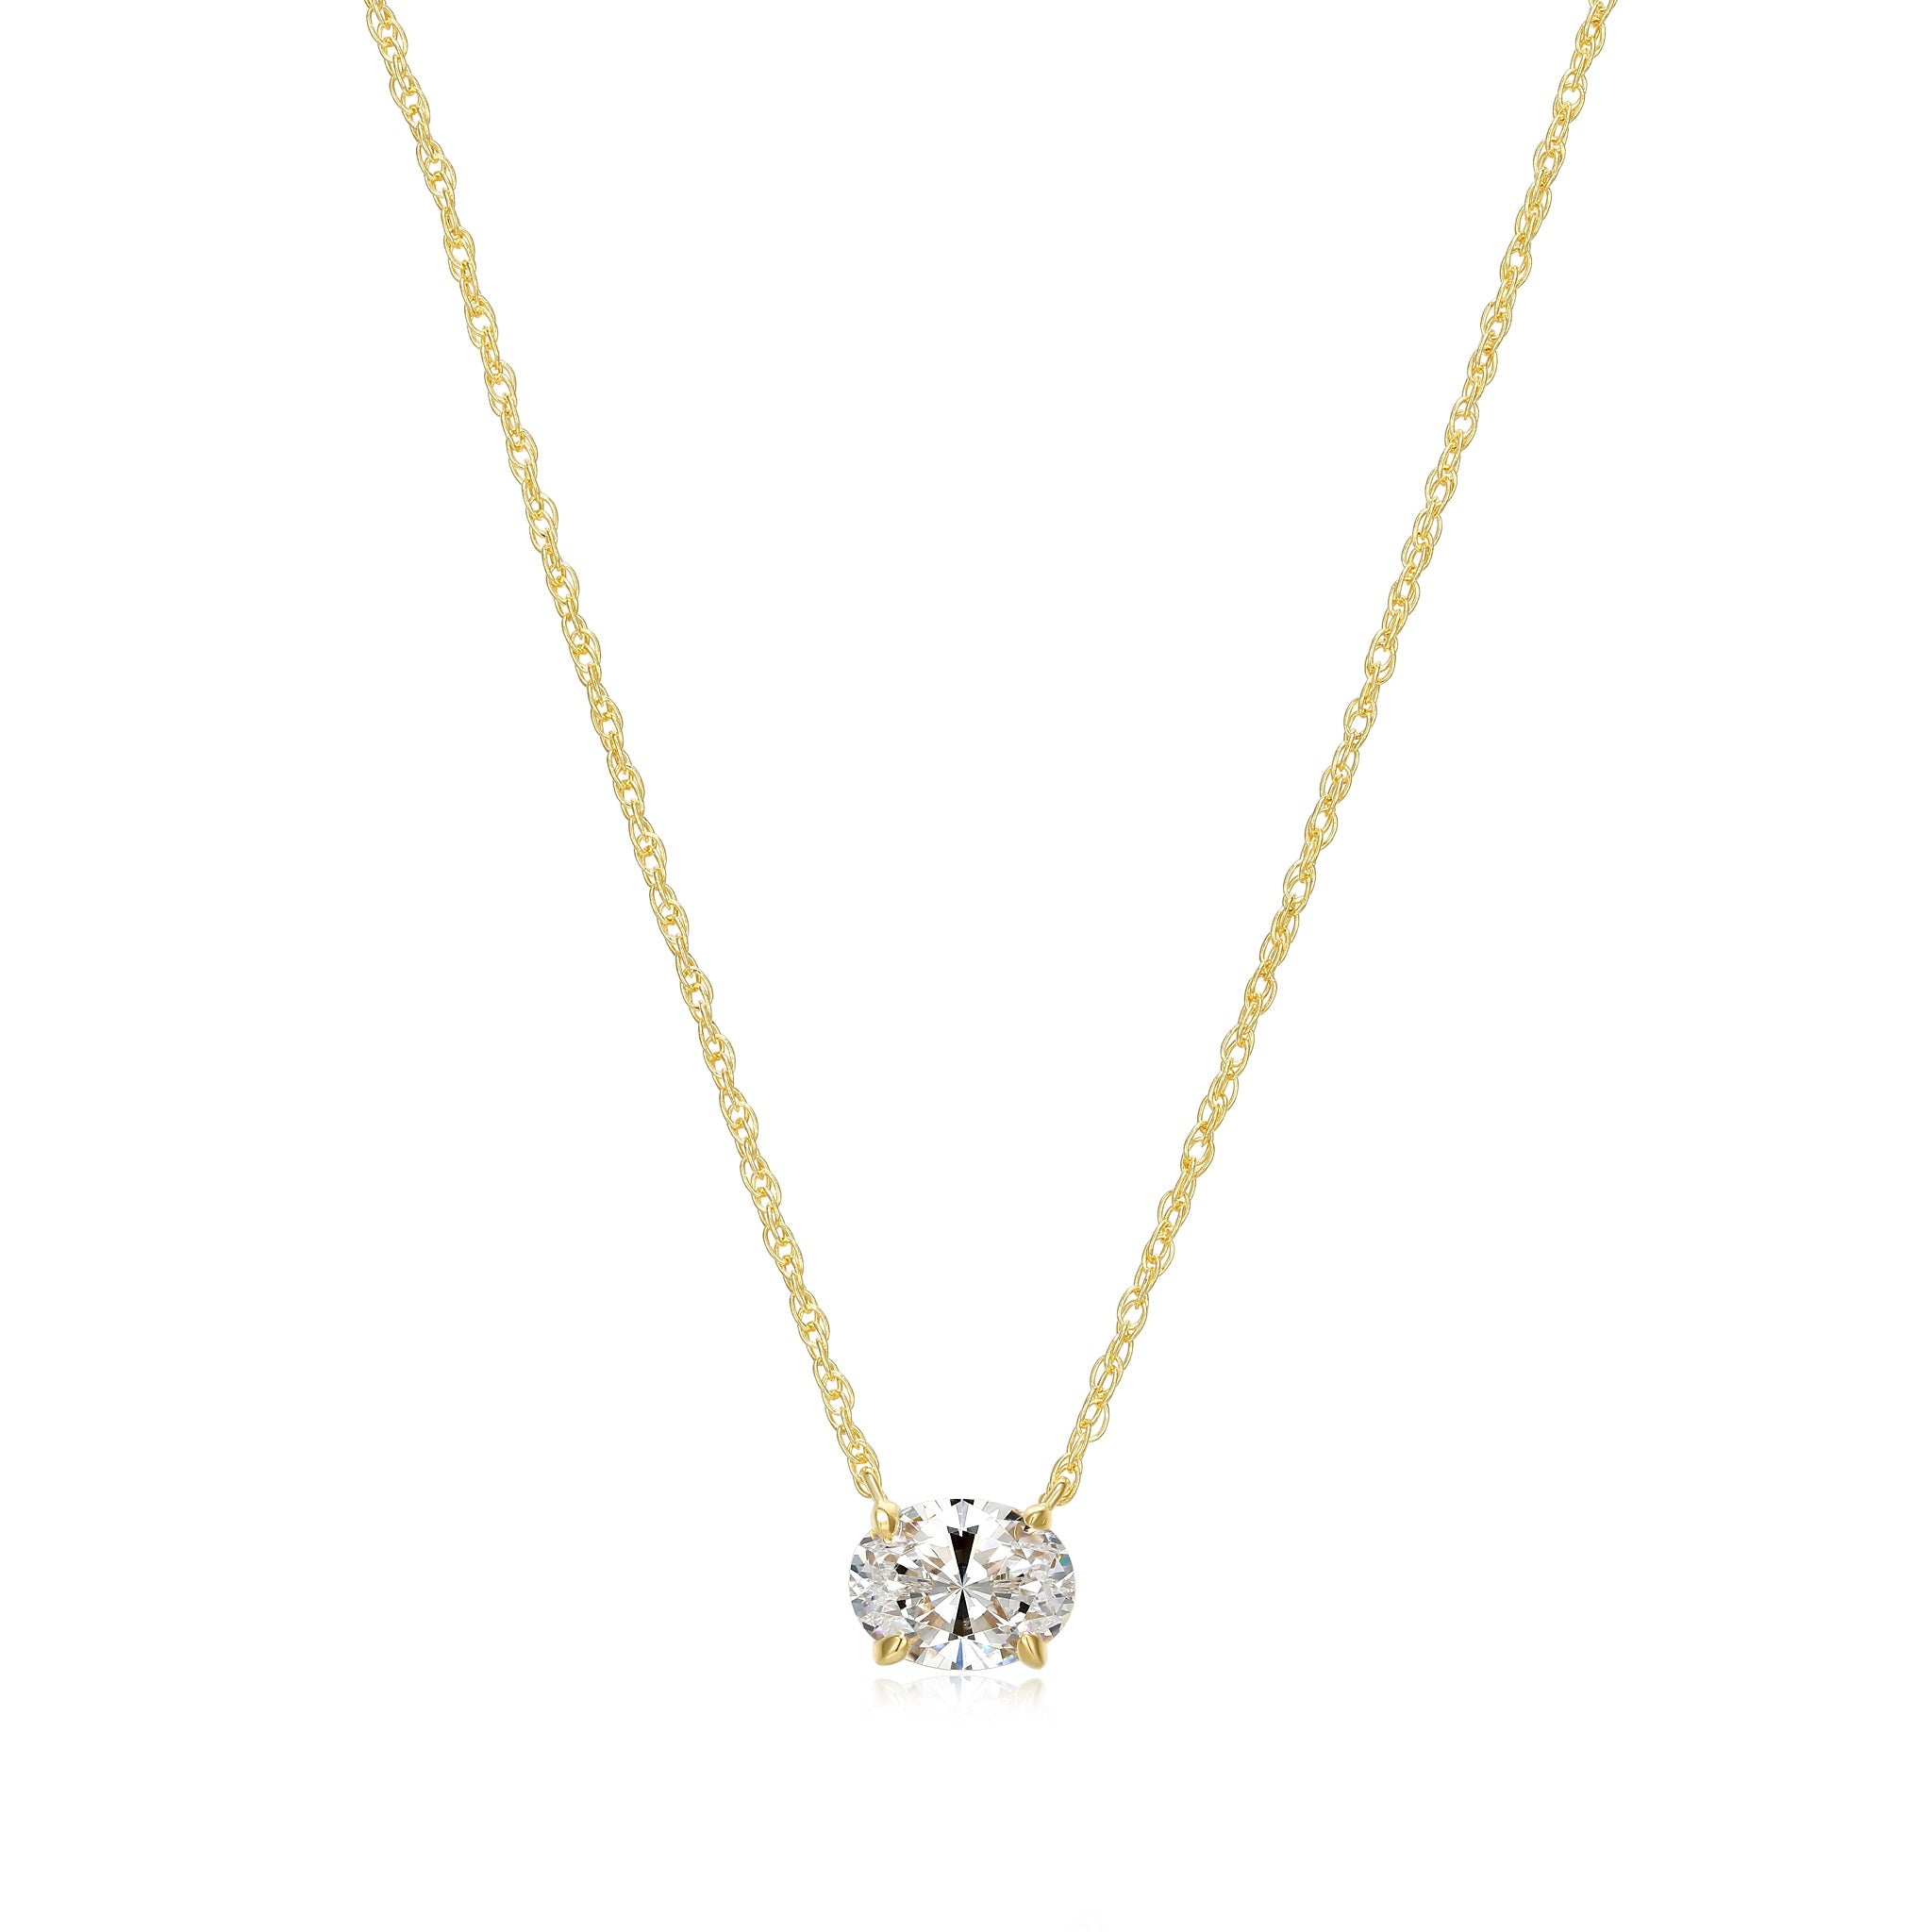 Reign 8x6 oval CZ necklace in gold plating